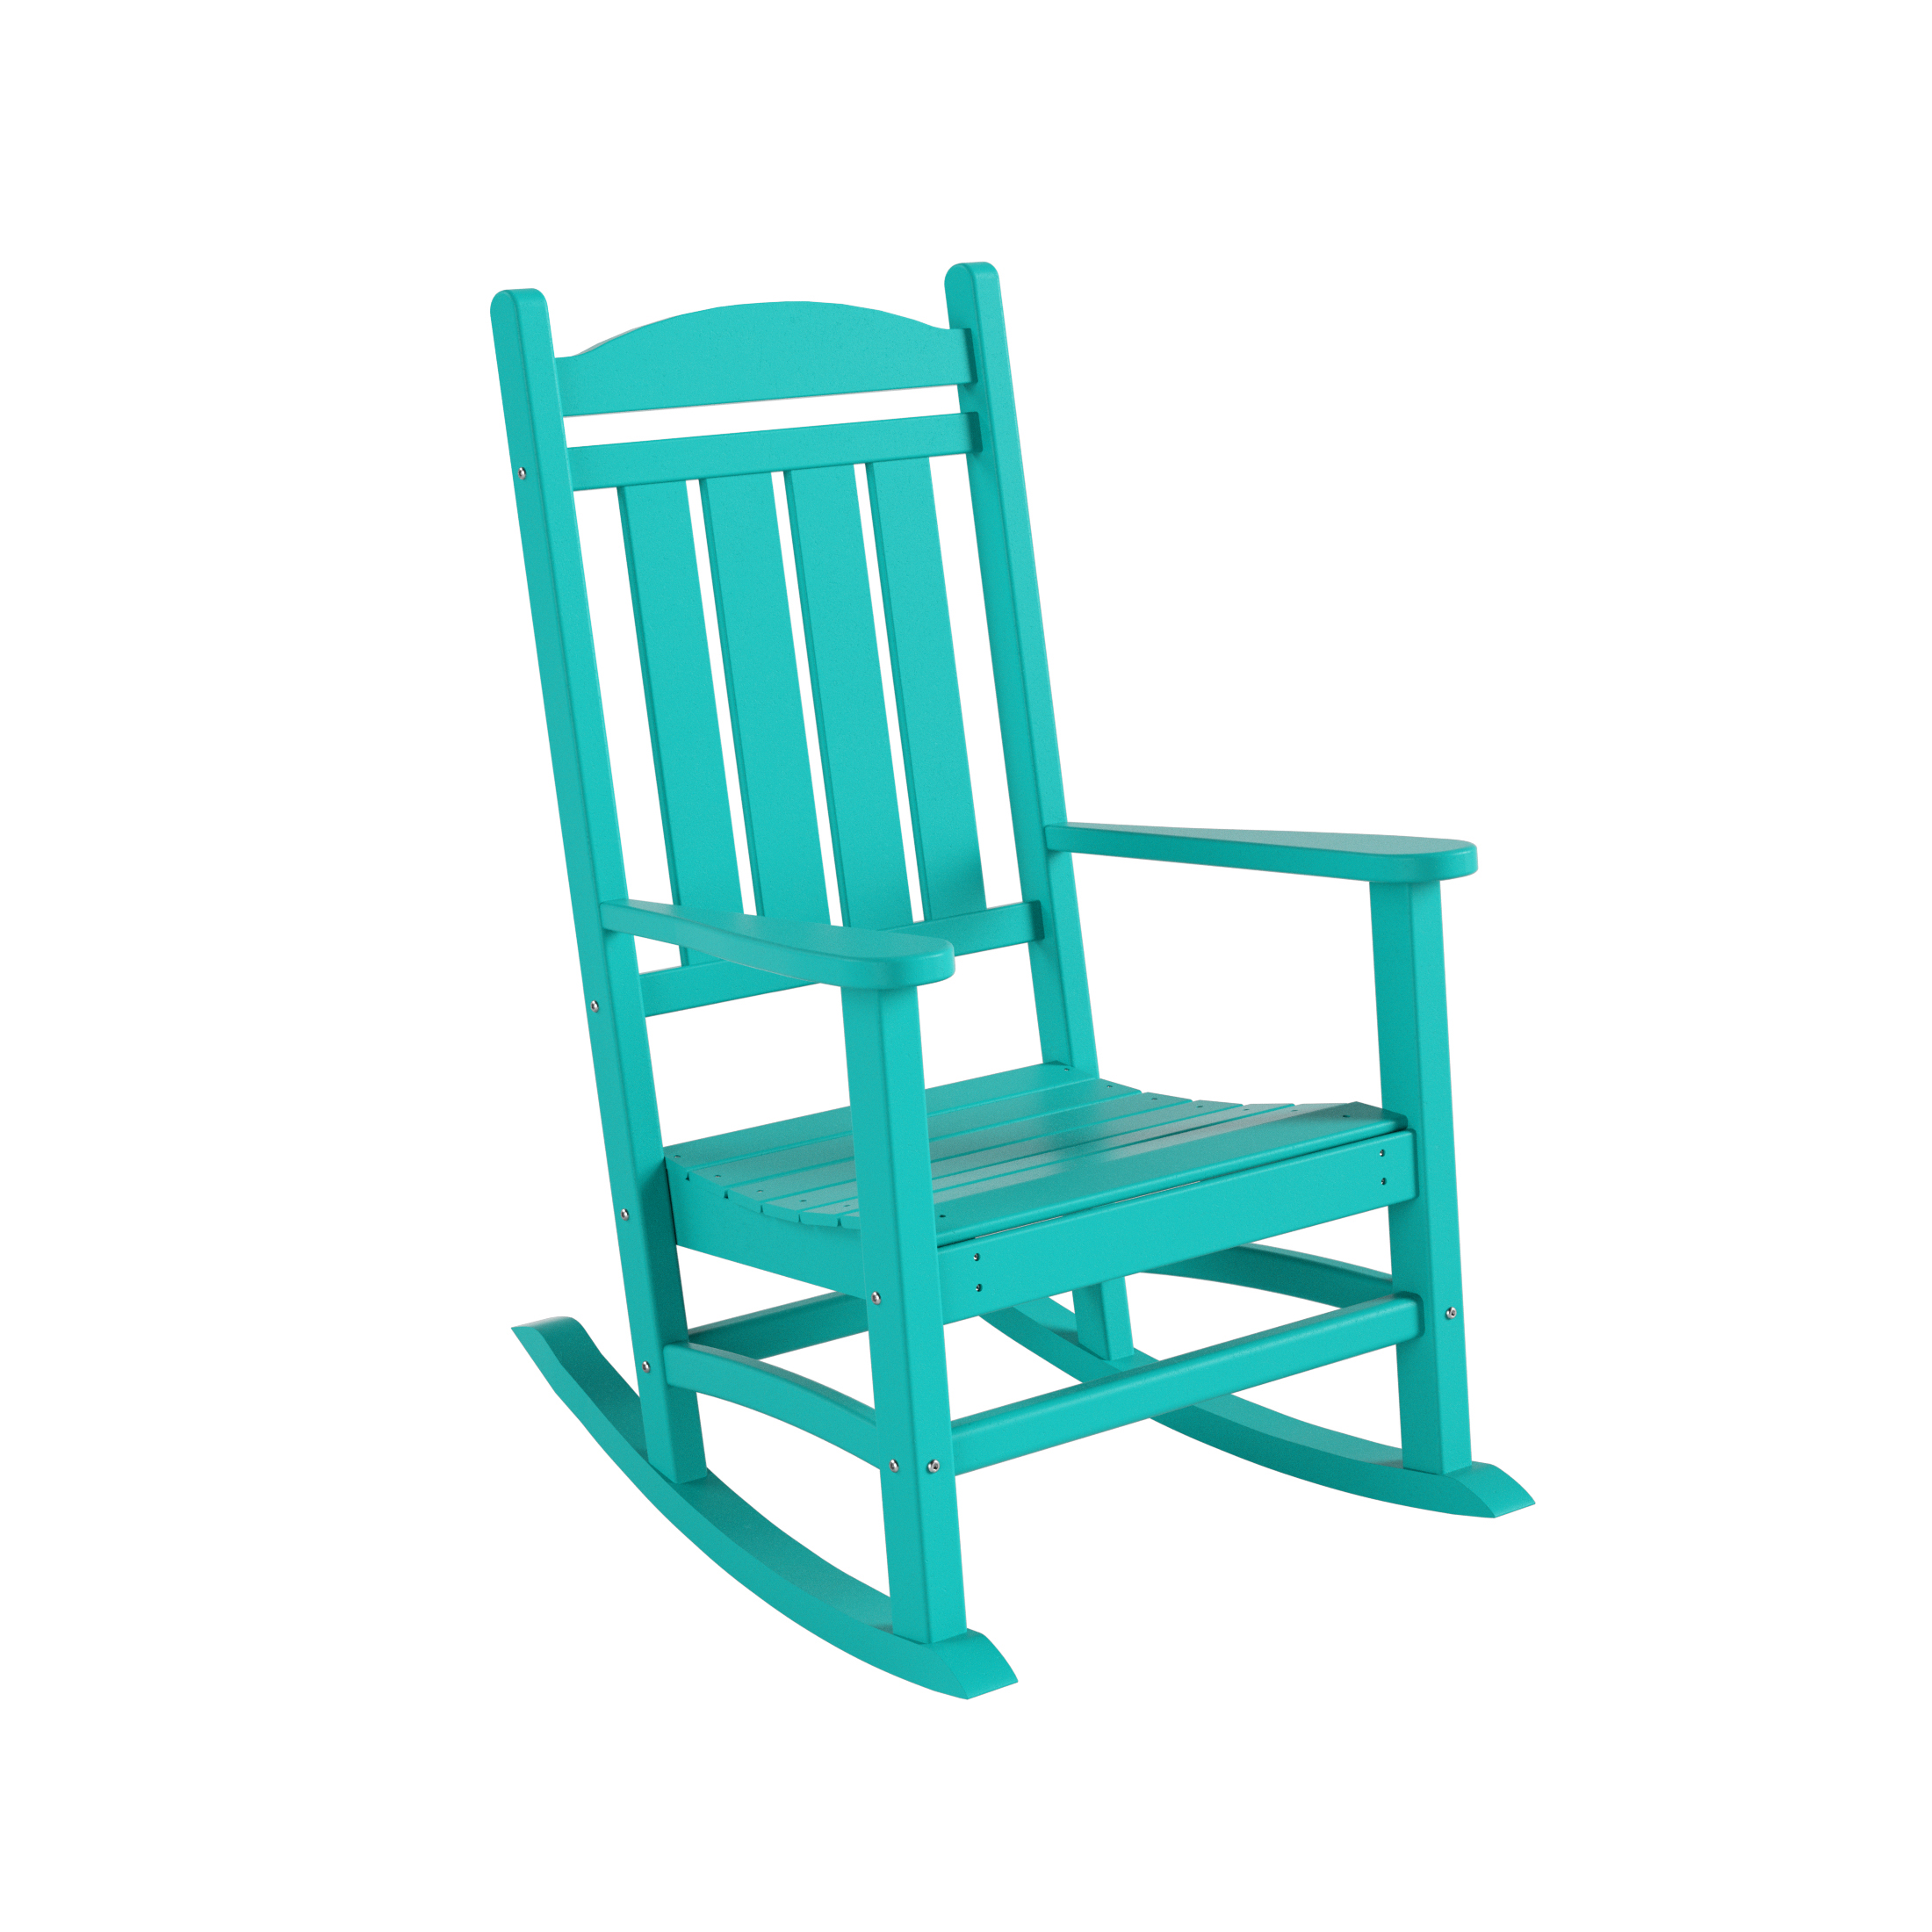 GARDEN 2-Piece Set Classic Plastic Porch Rocking Chair with Round Side Table Included, Turquoise - image 4 of 7